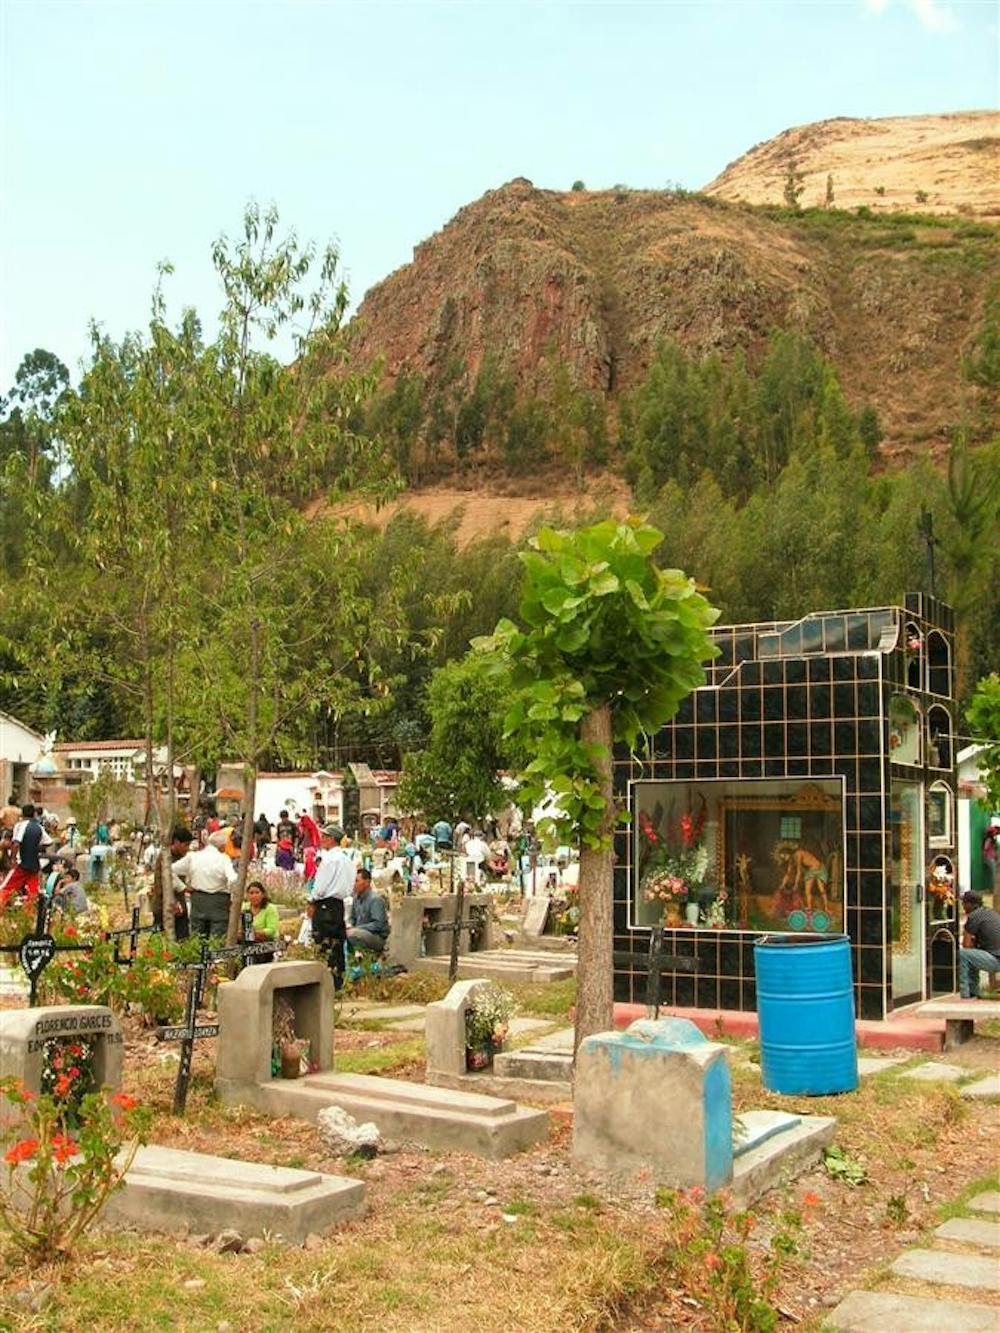 A crowd of vendors and families celebrate outside the entrance to the graveyard "Jardines de la Paz," or "Gardens of Peace," in Calca, Peru, for the Nov. 2 Day of the Dead holiday.